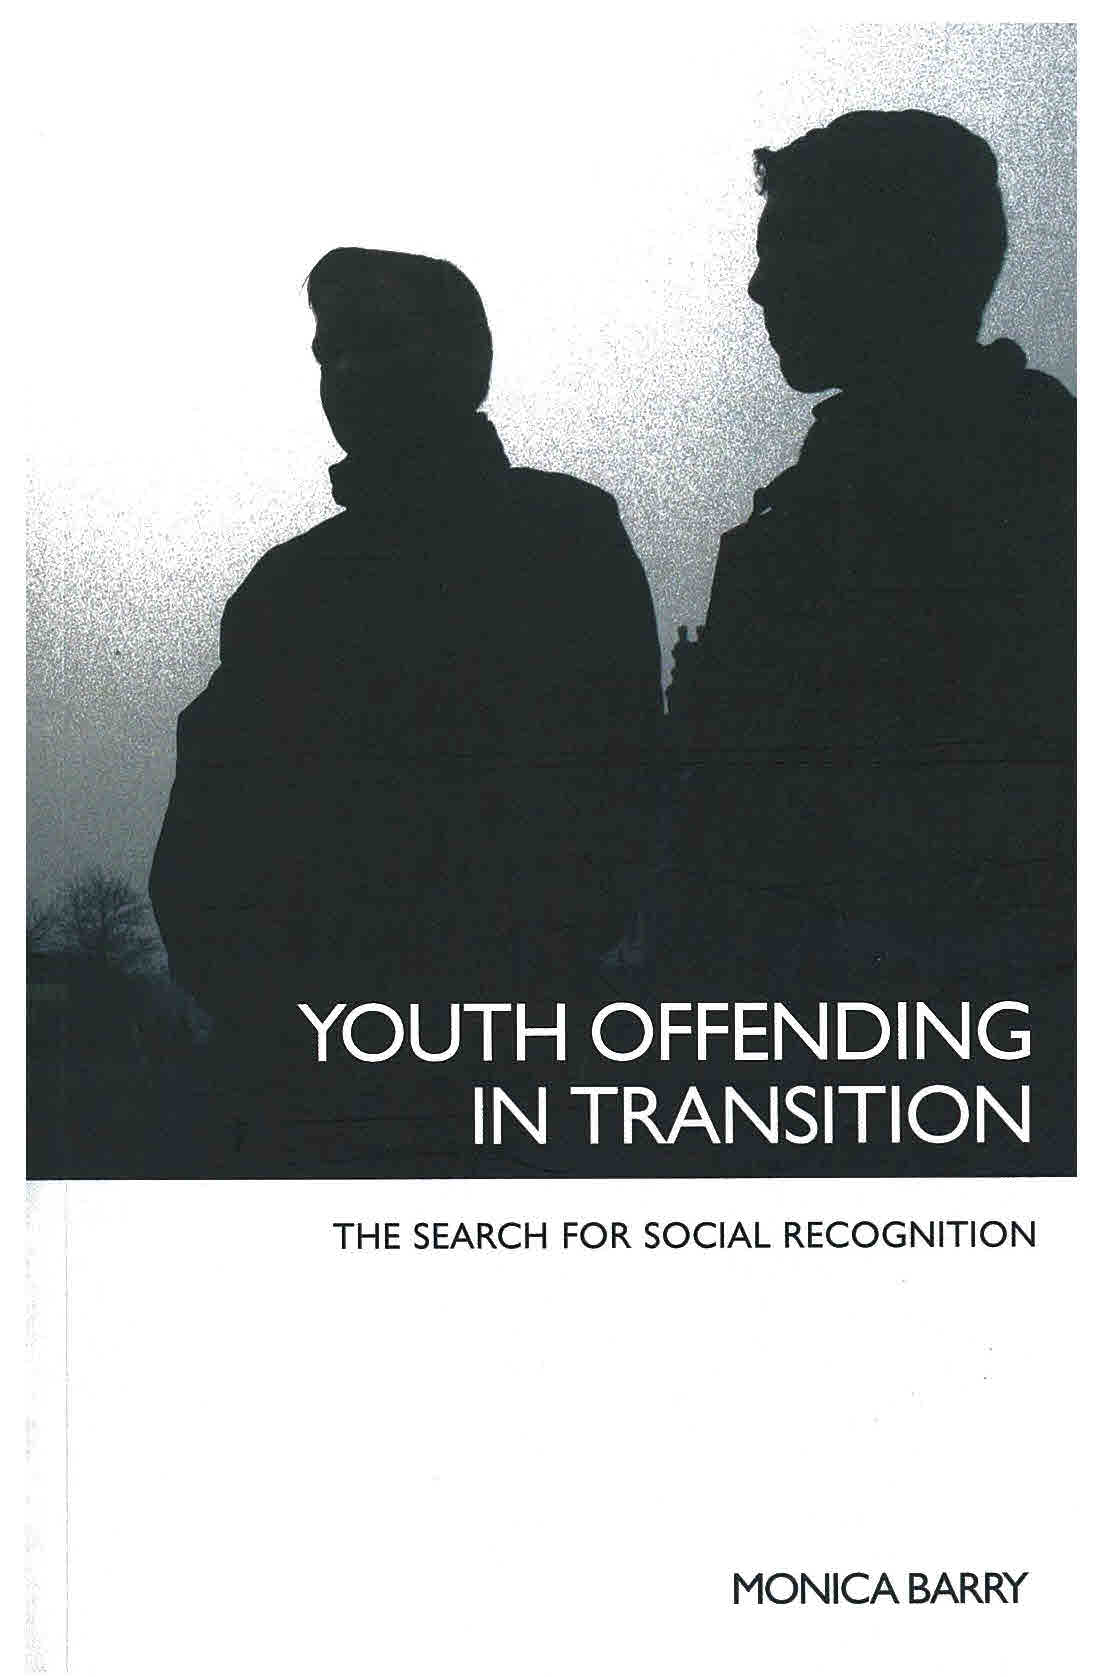 Youth offending in transition